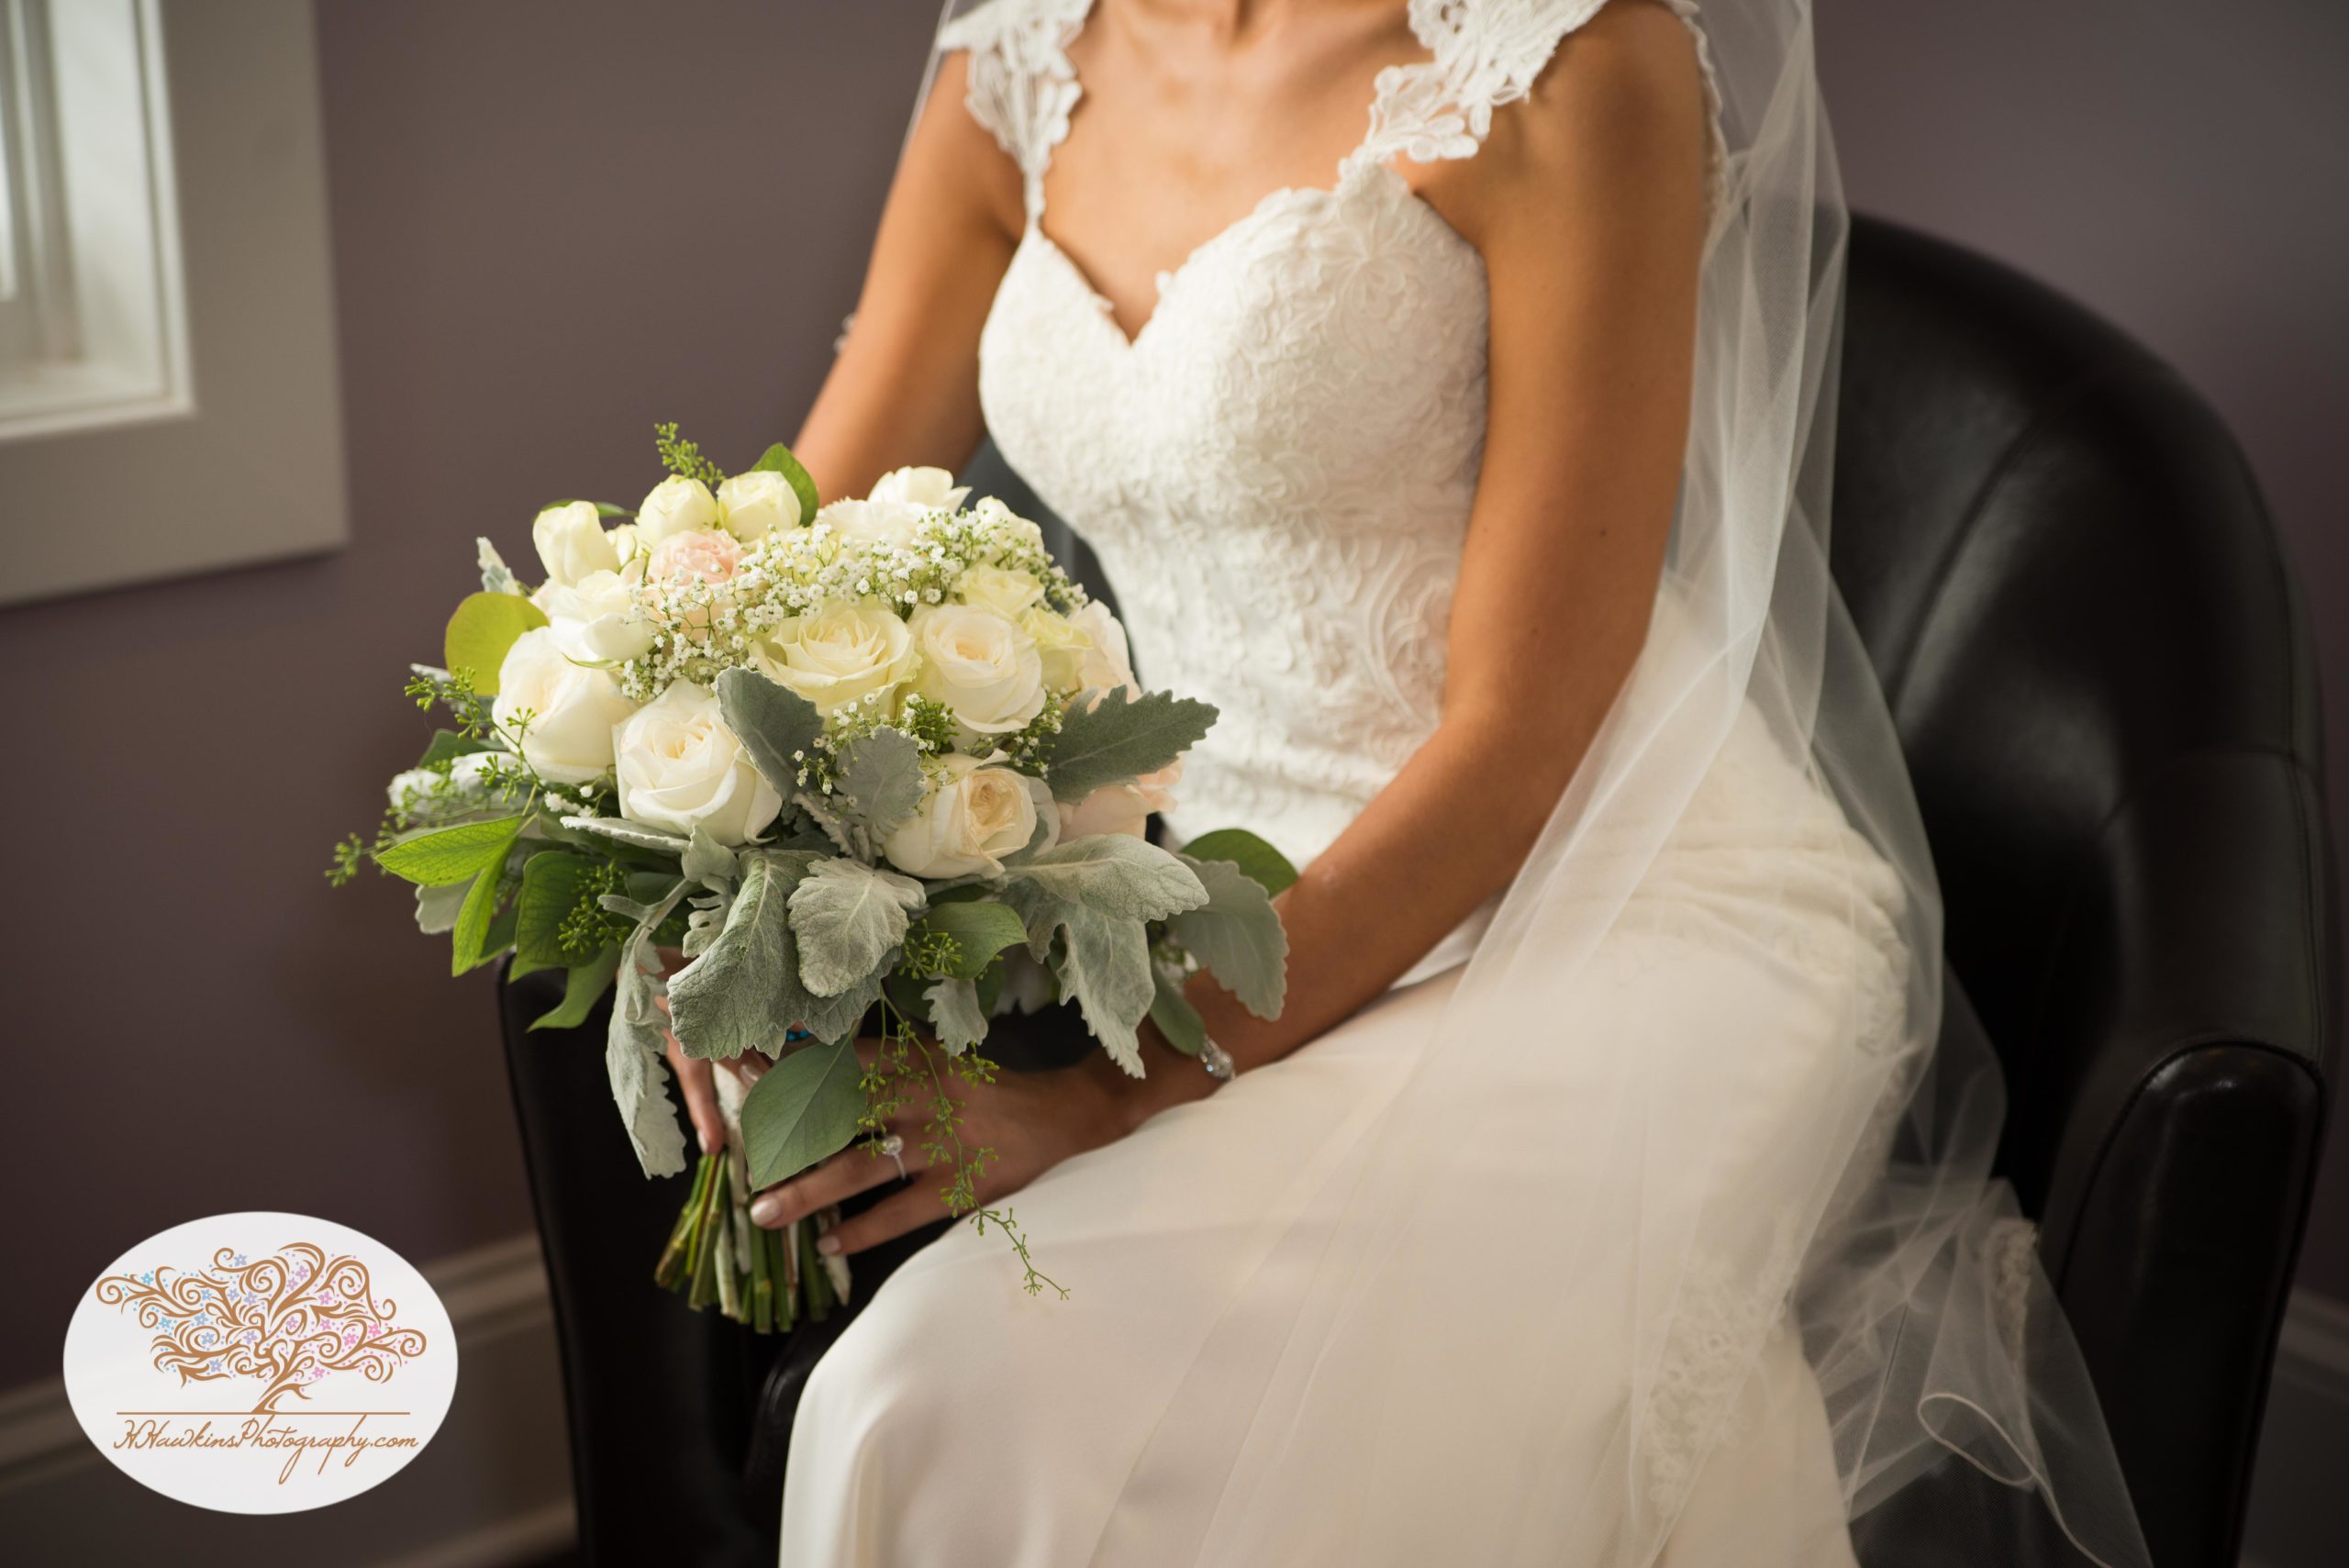 Bride sits in a chair in her lace wedding dress with a bouquet of white flowers in her lap